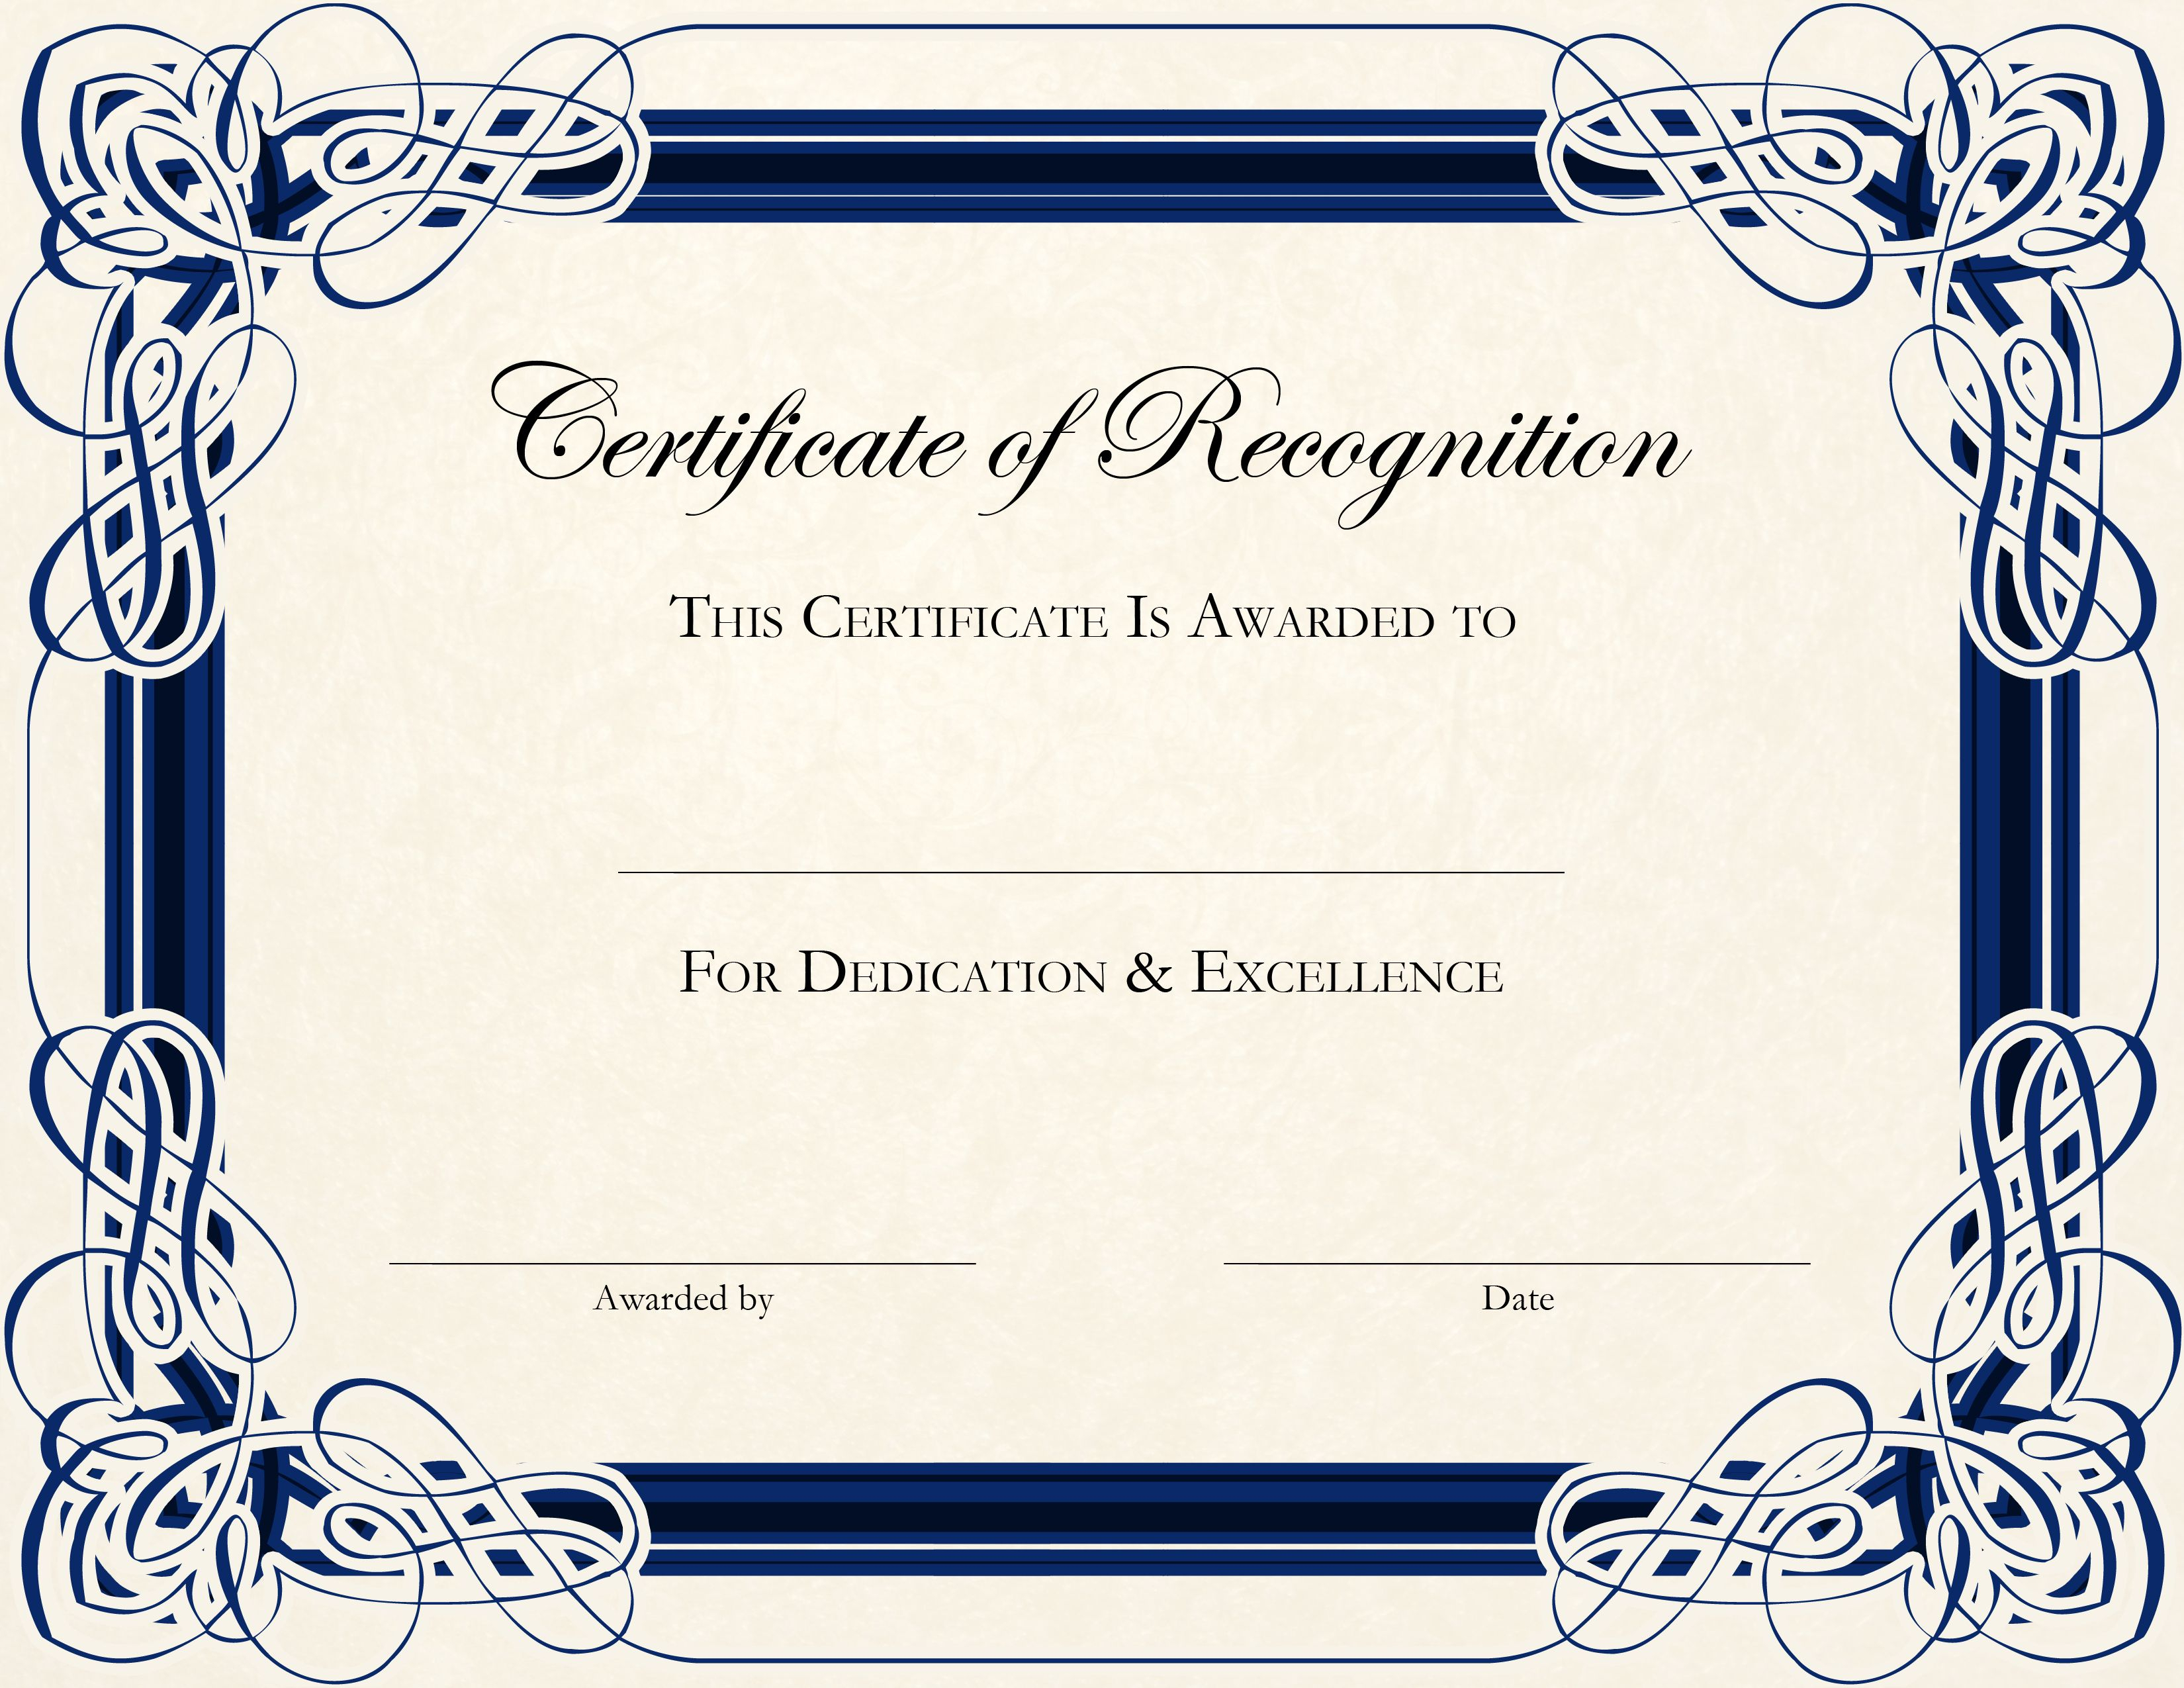 Certificate Template Designs Recognition Docs | Blankets Within Certificate Of Appreciation Template Doc